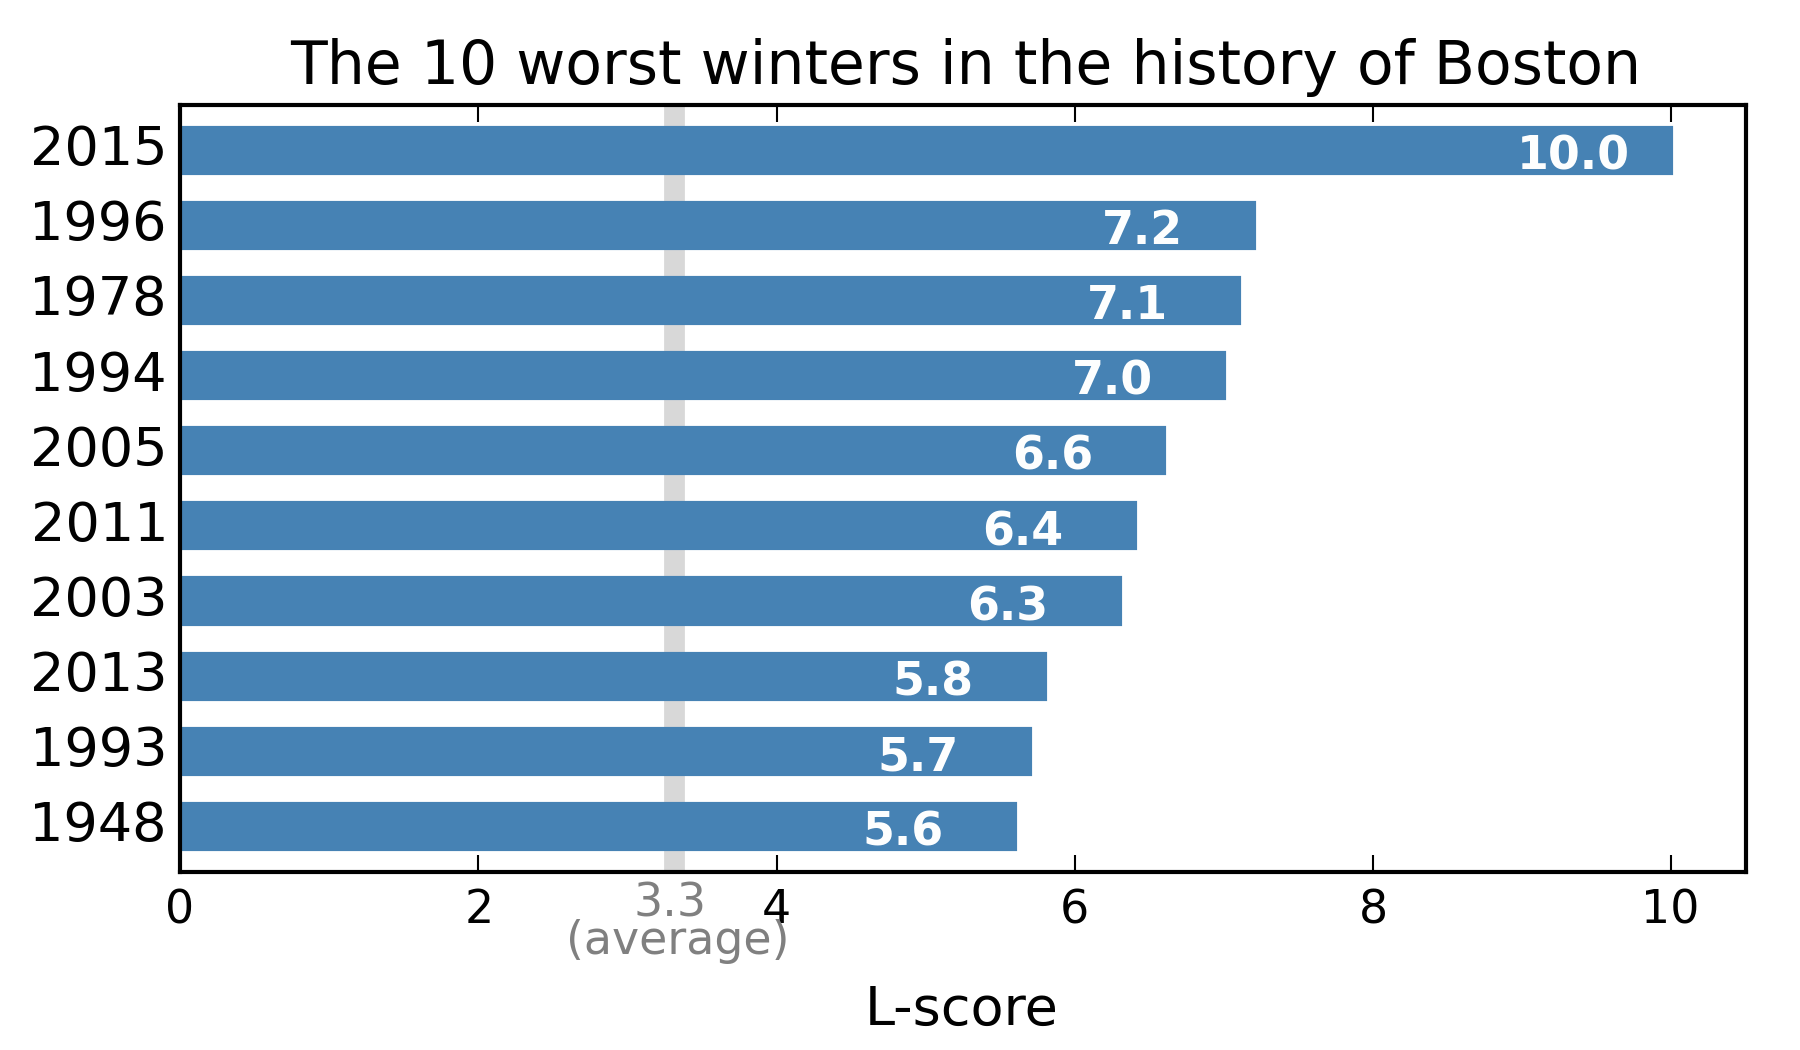 The worst 10 winters in the history of Boston